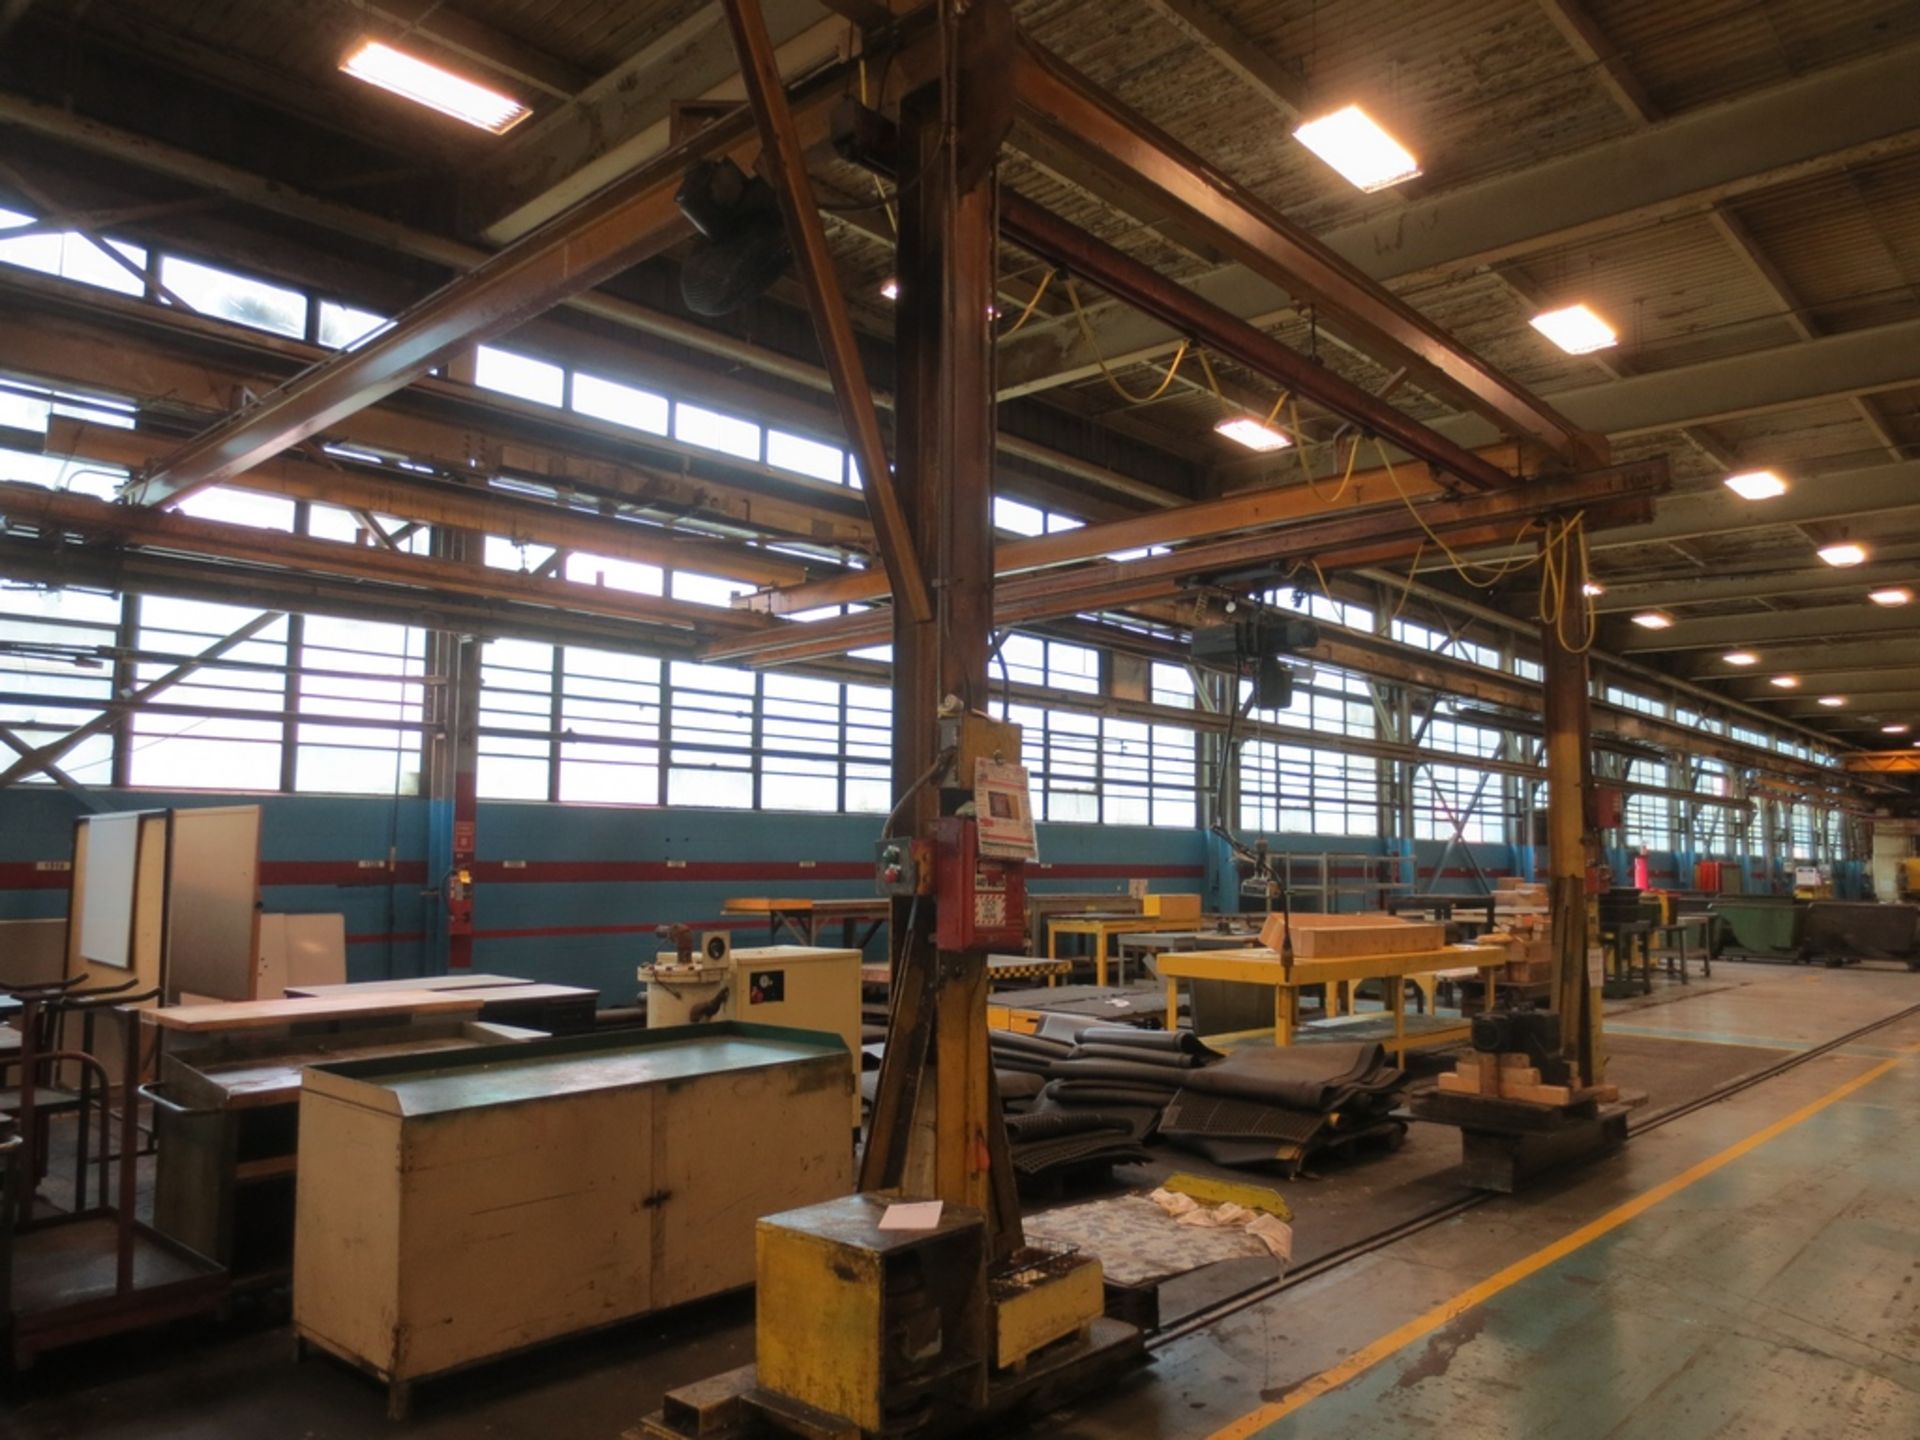 ONE TON GANTRY CRANE WITH DEMAG HOIST, 16' X 27' APPROX. - Image 2 of 3